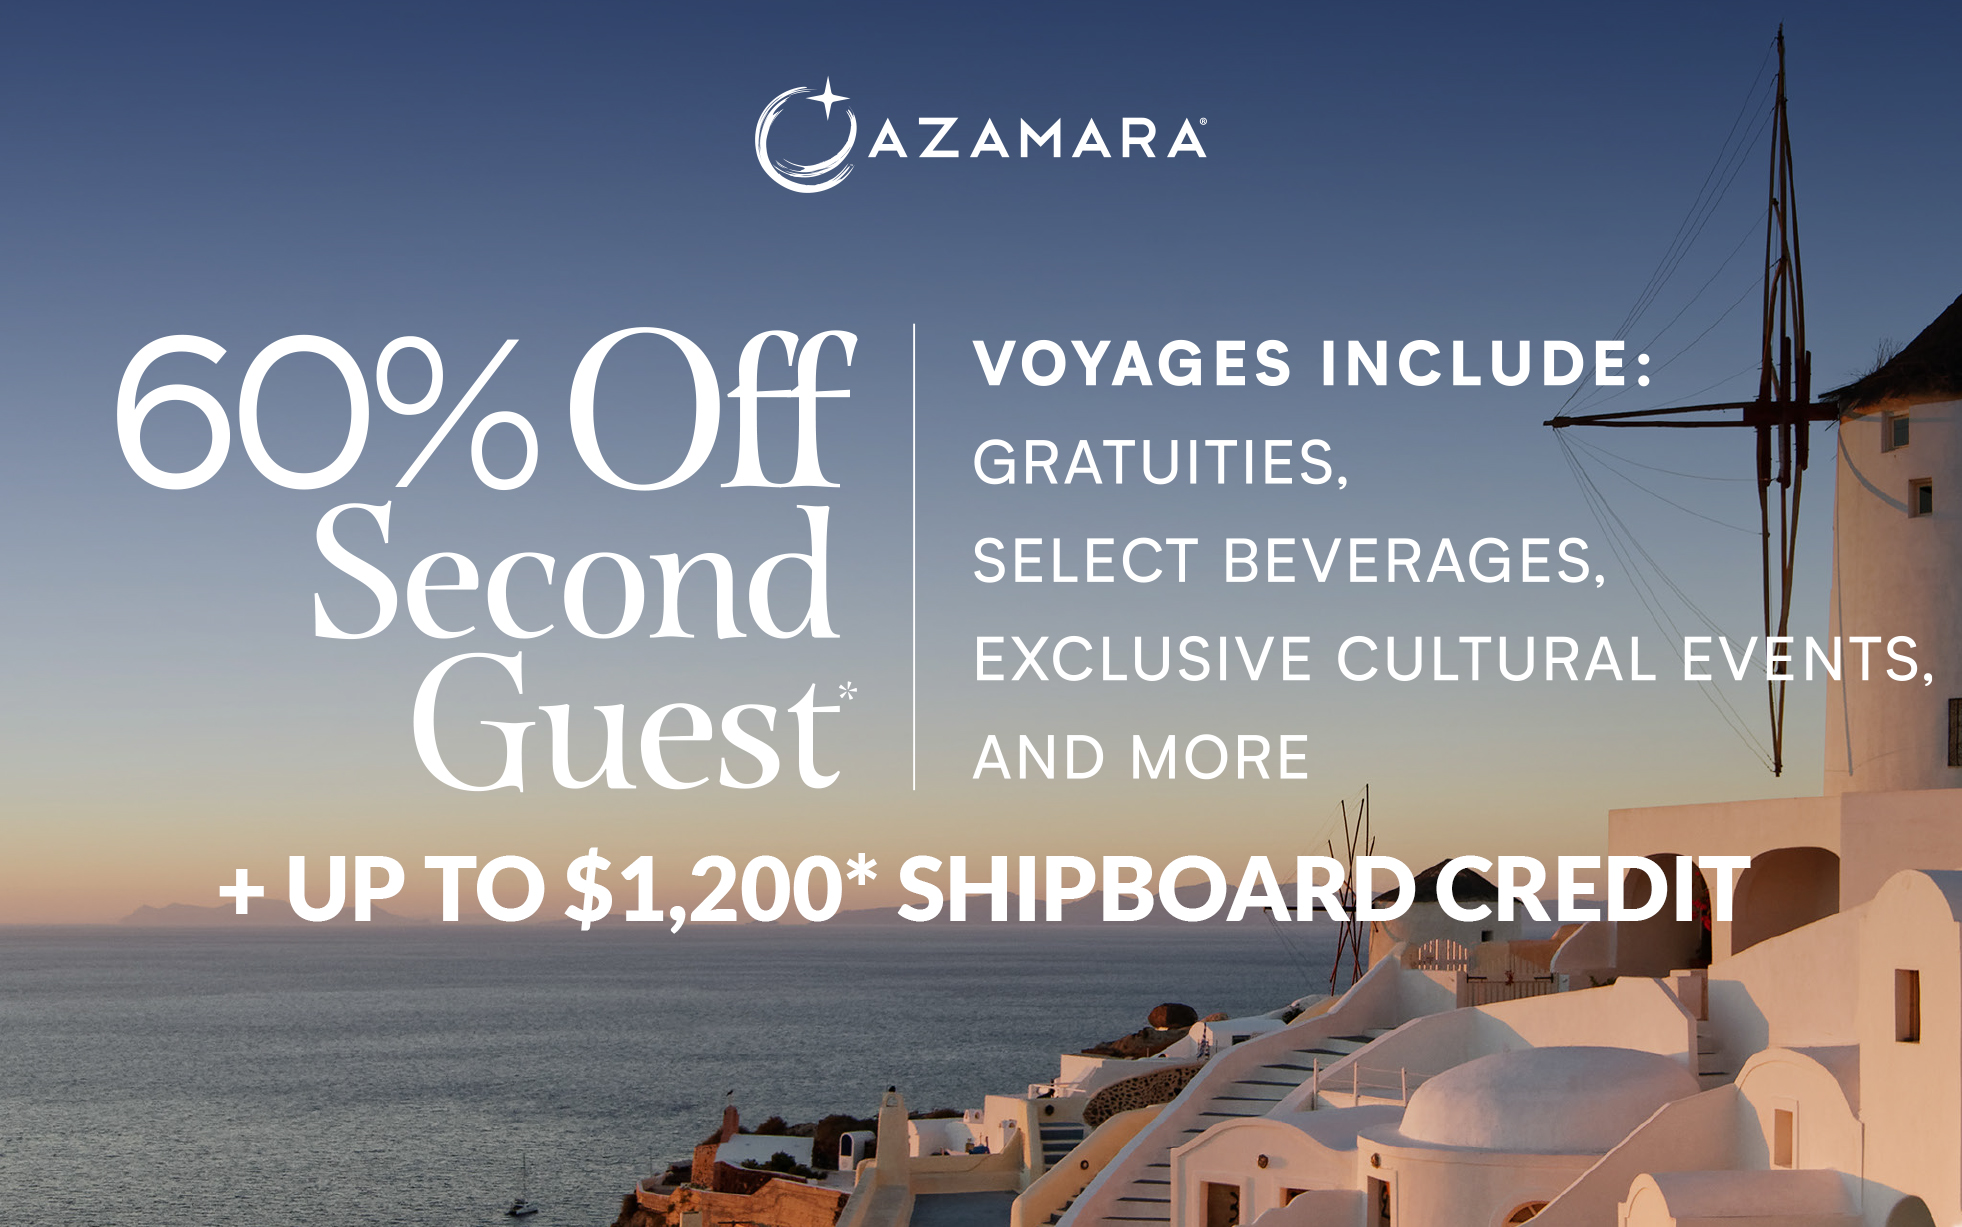 Up to 60% Off Second Guest plus up to $1,200 onboard credit*